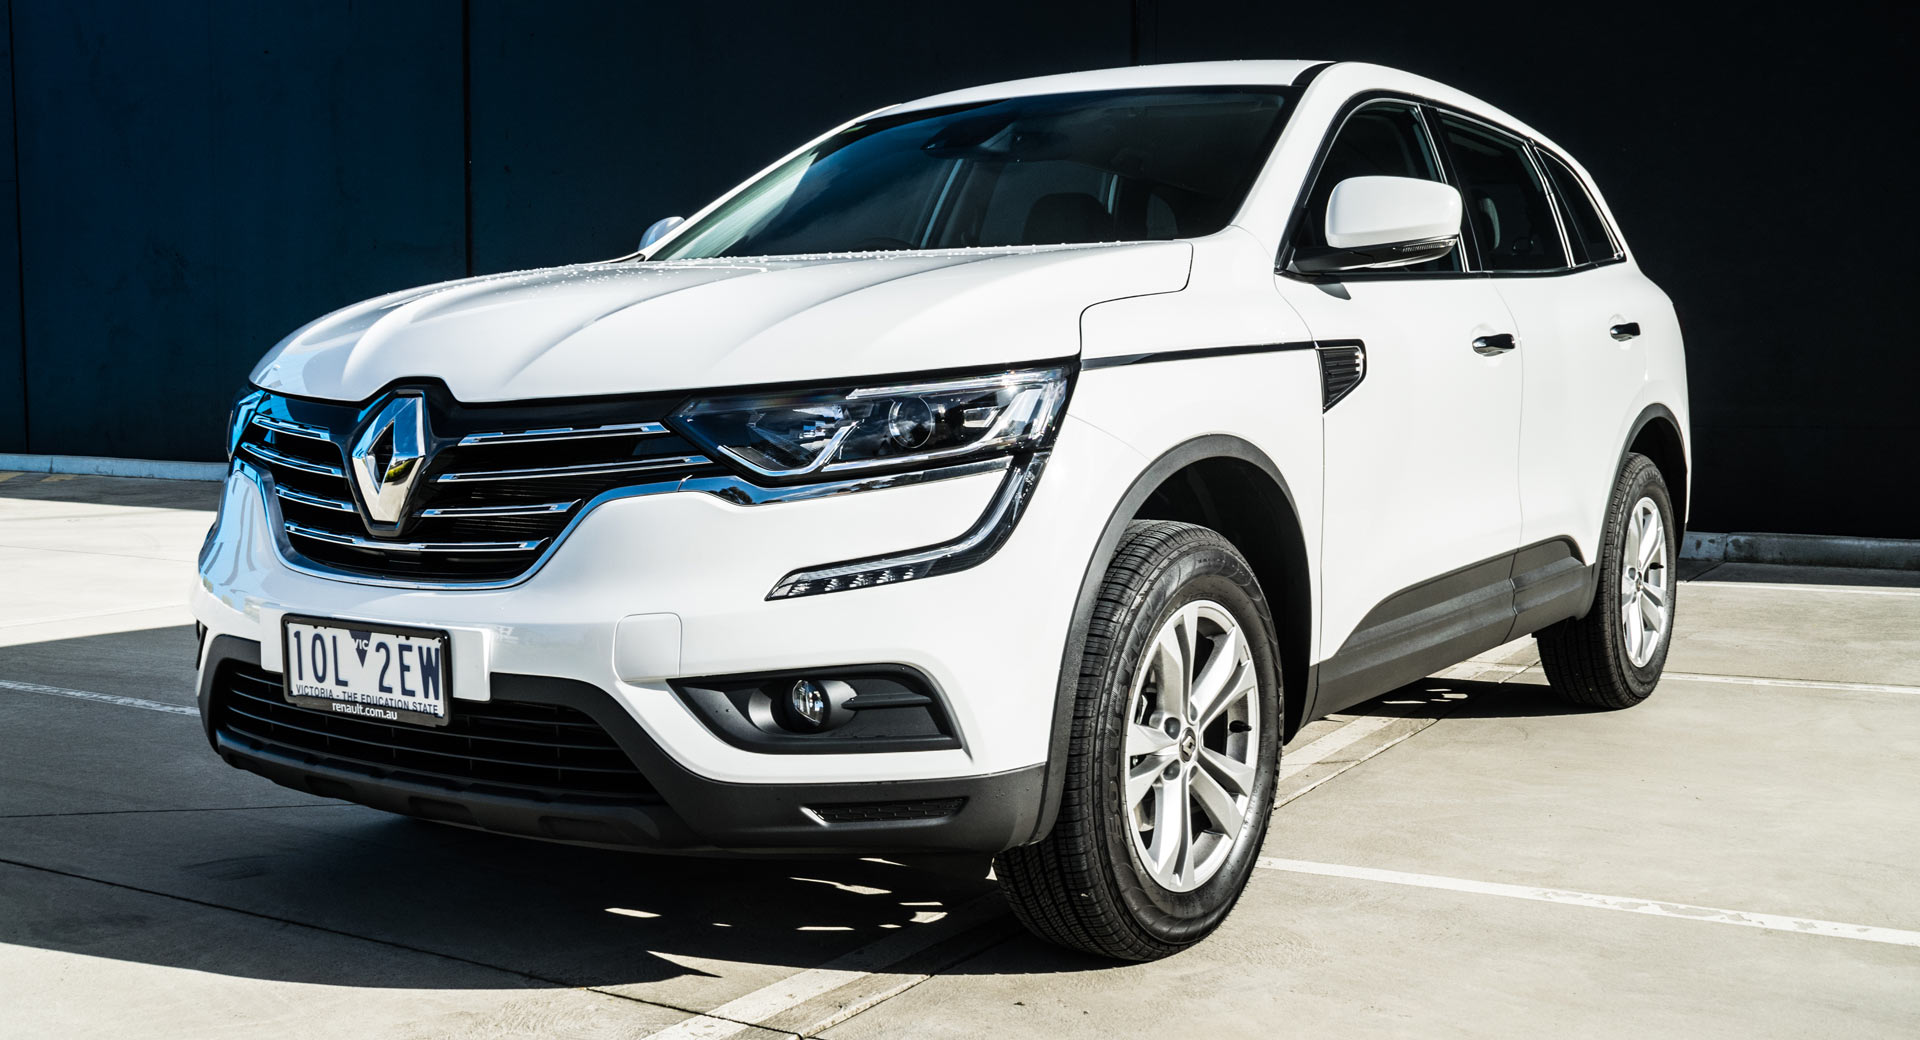 Driven: 2019 Renault Koleos Life Is A Good Family SUV But Not Great